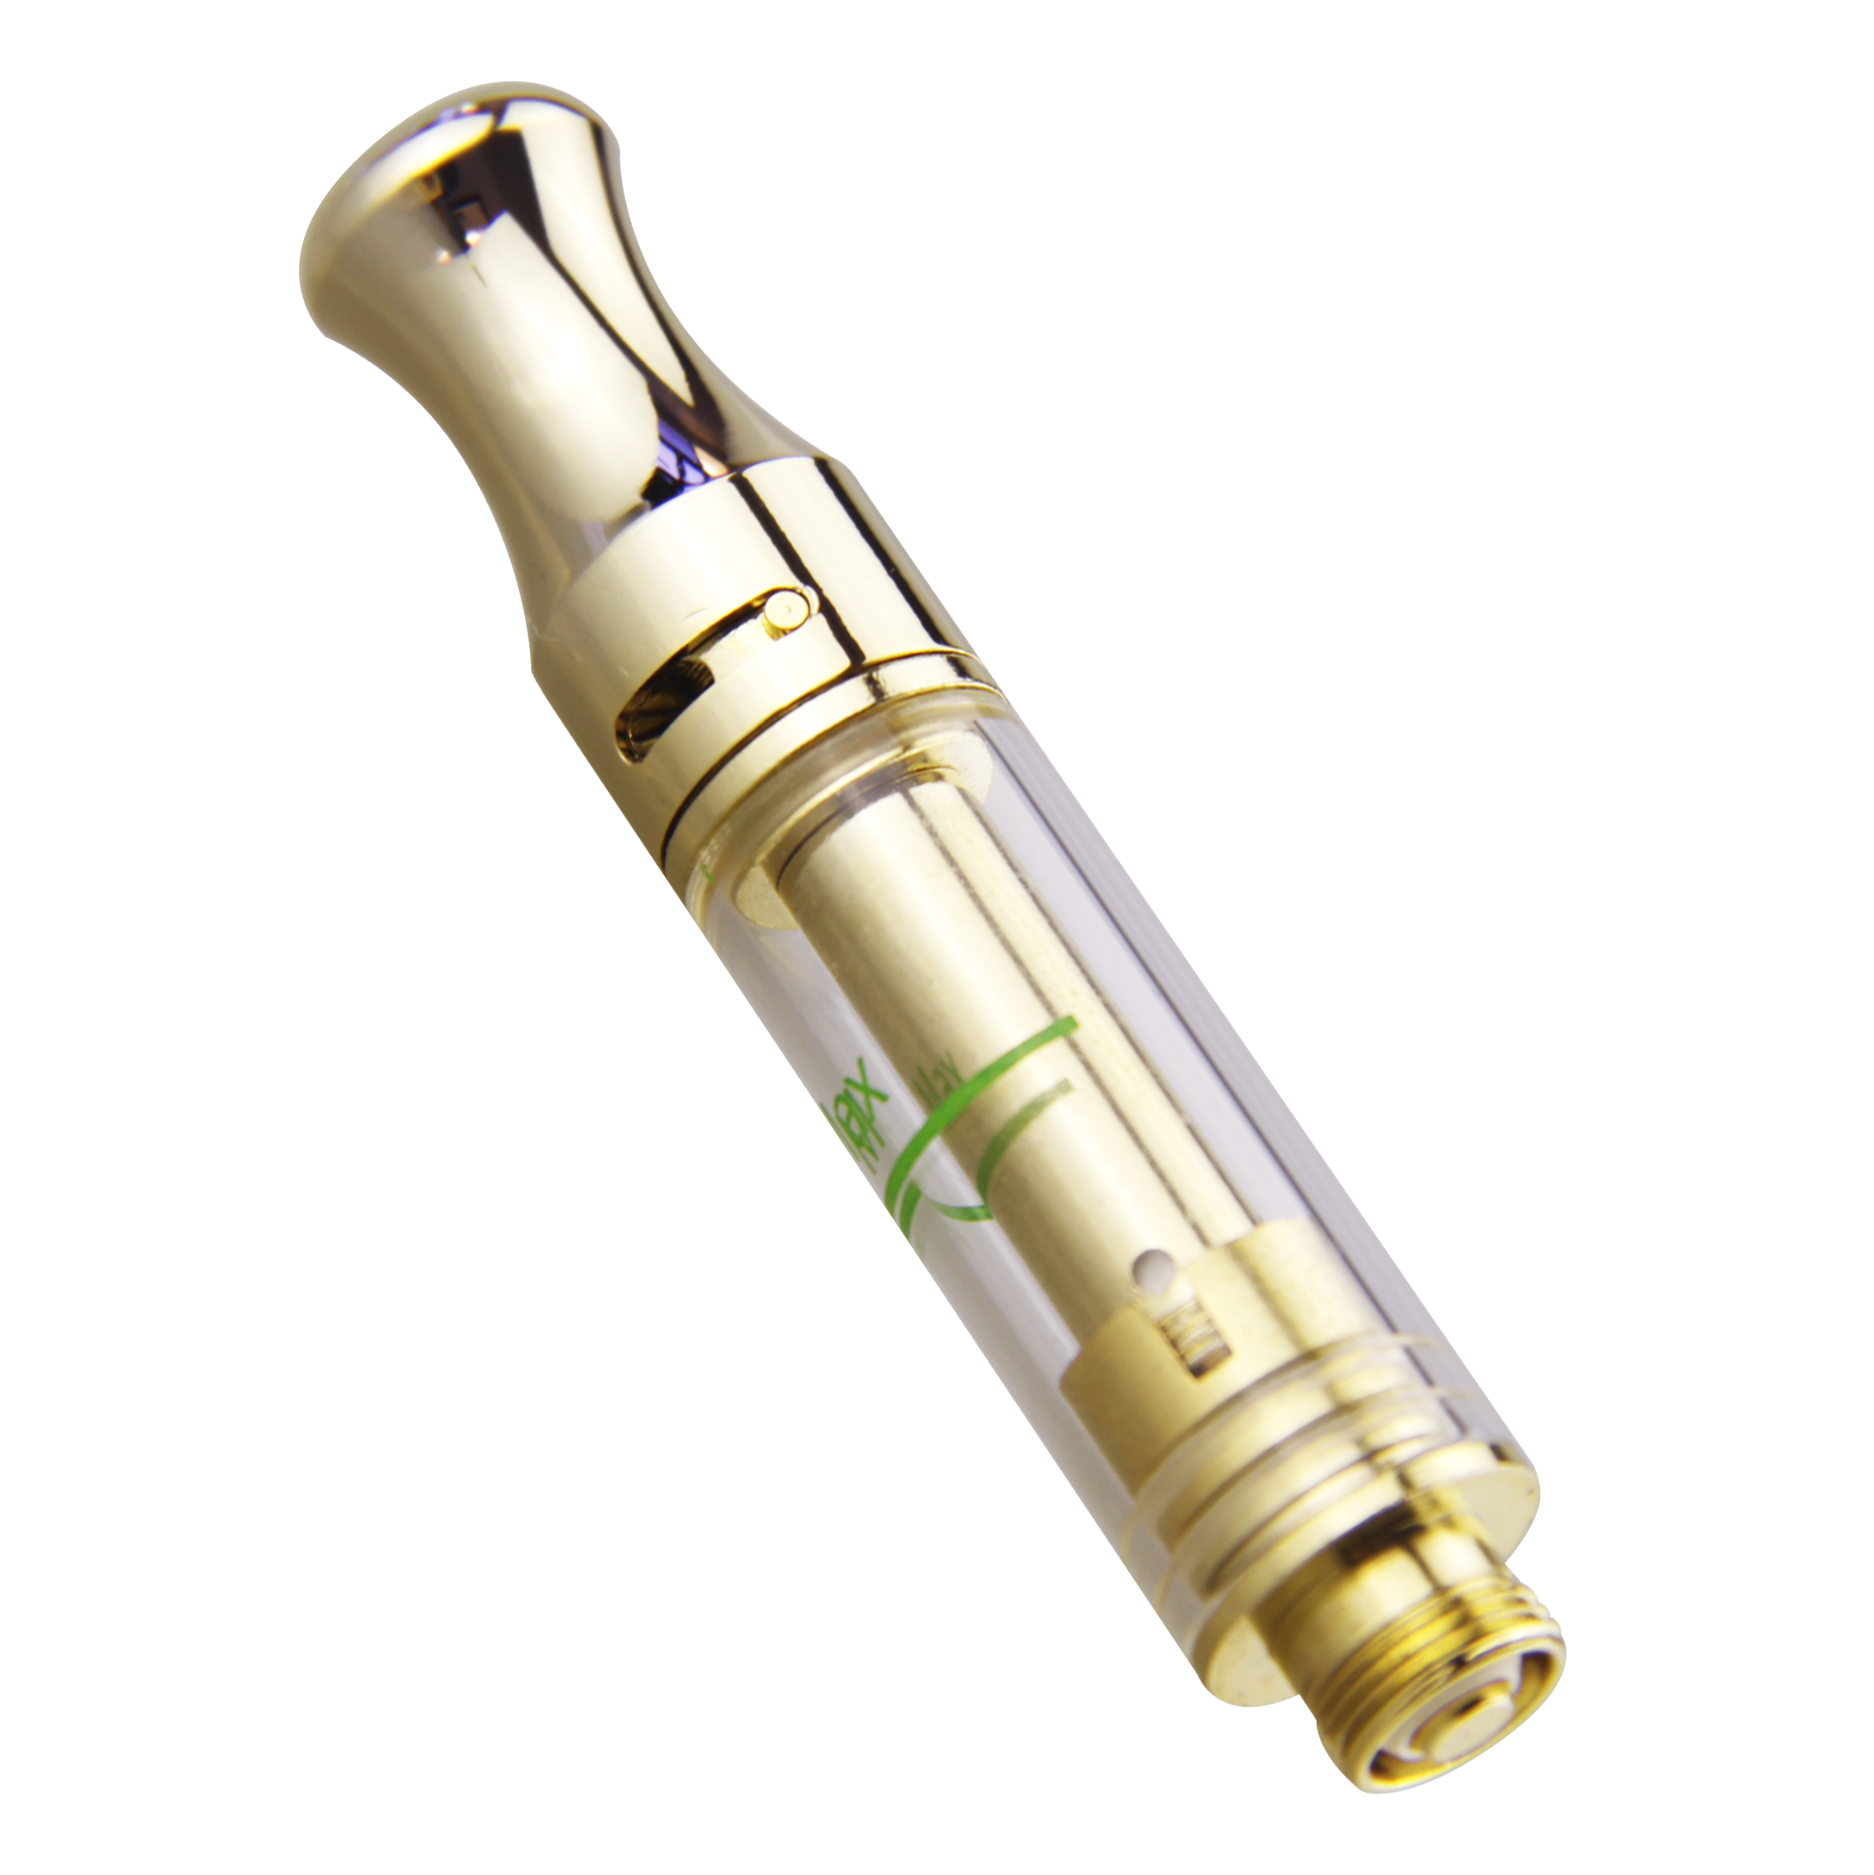 Gold 1 ml DM 009 510 thread vape cartridge with a green max fill line graduated onto the barrel and adjustable airflow port